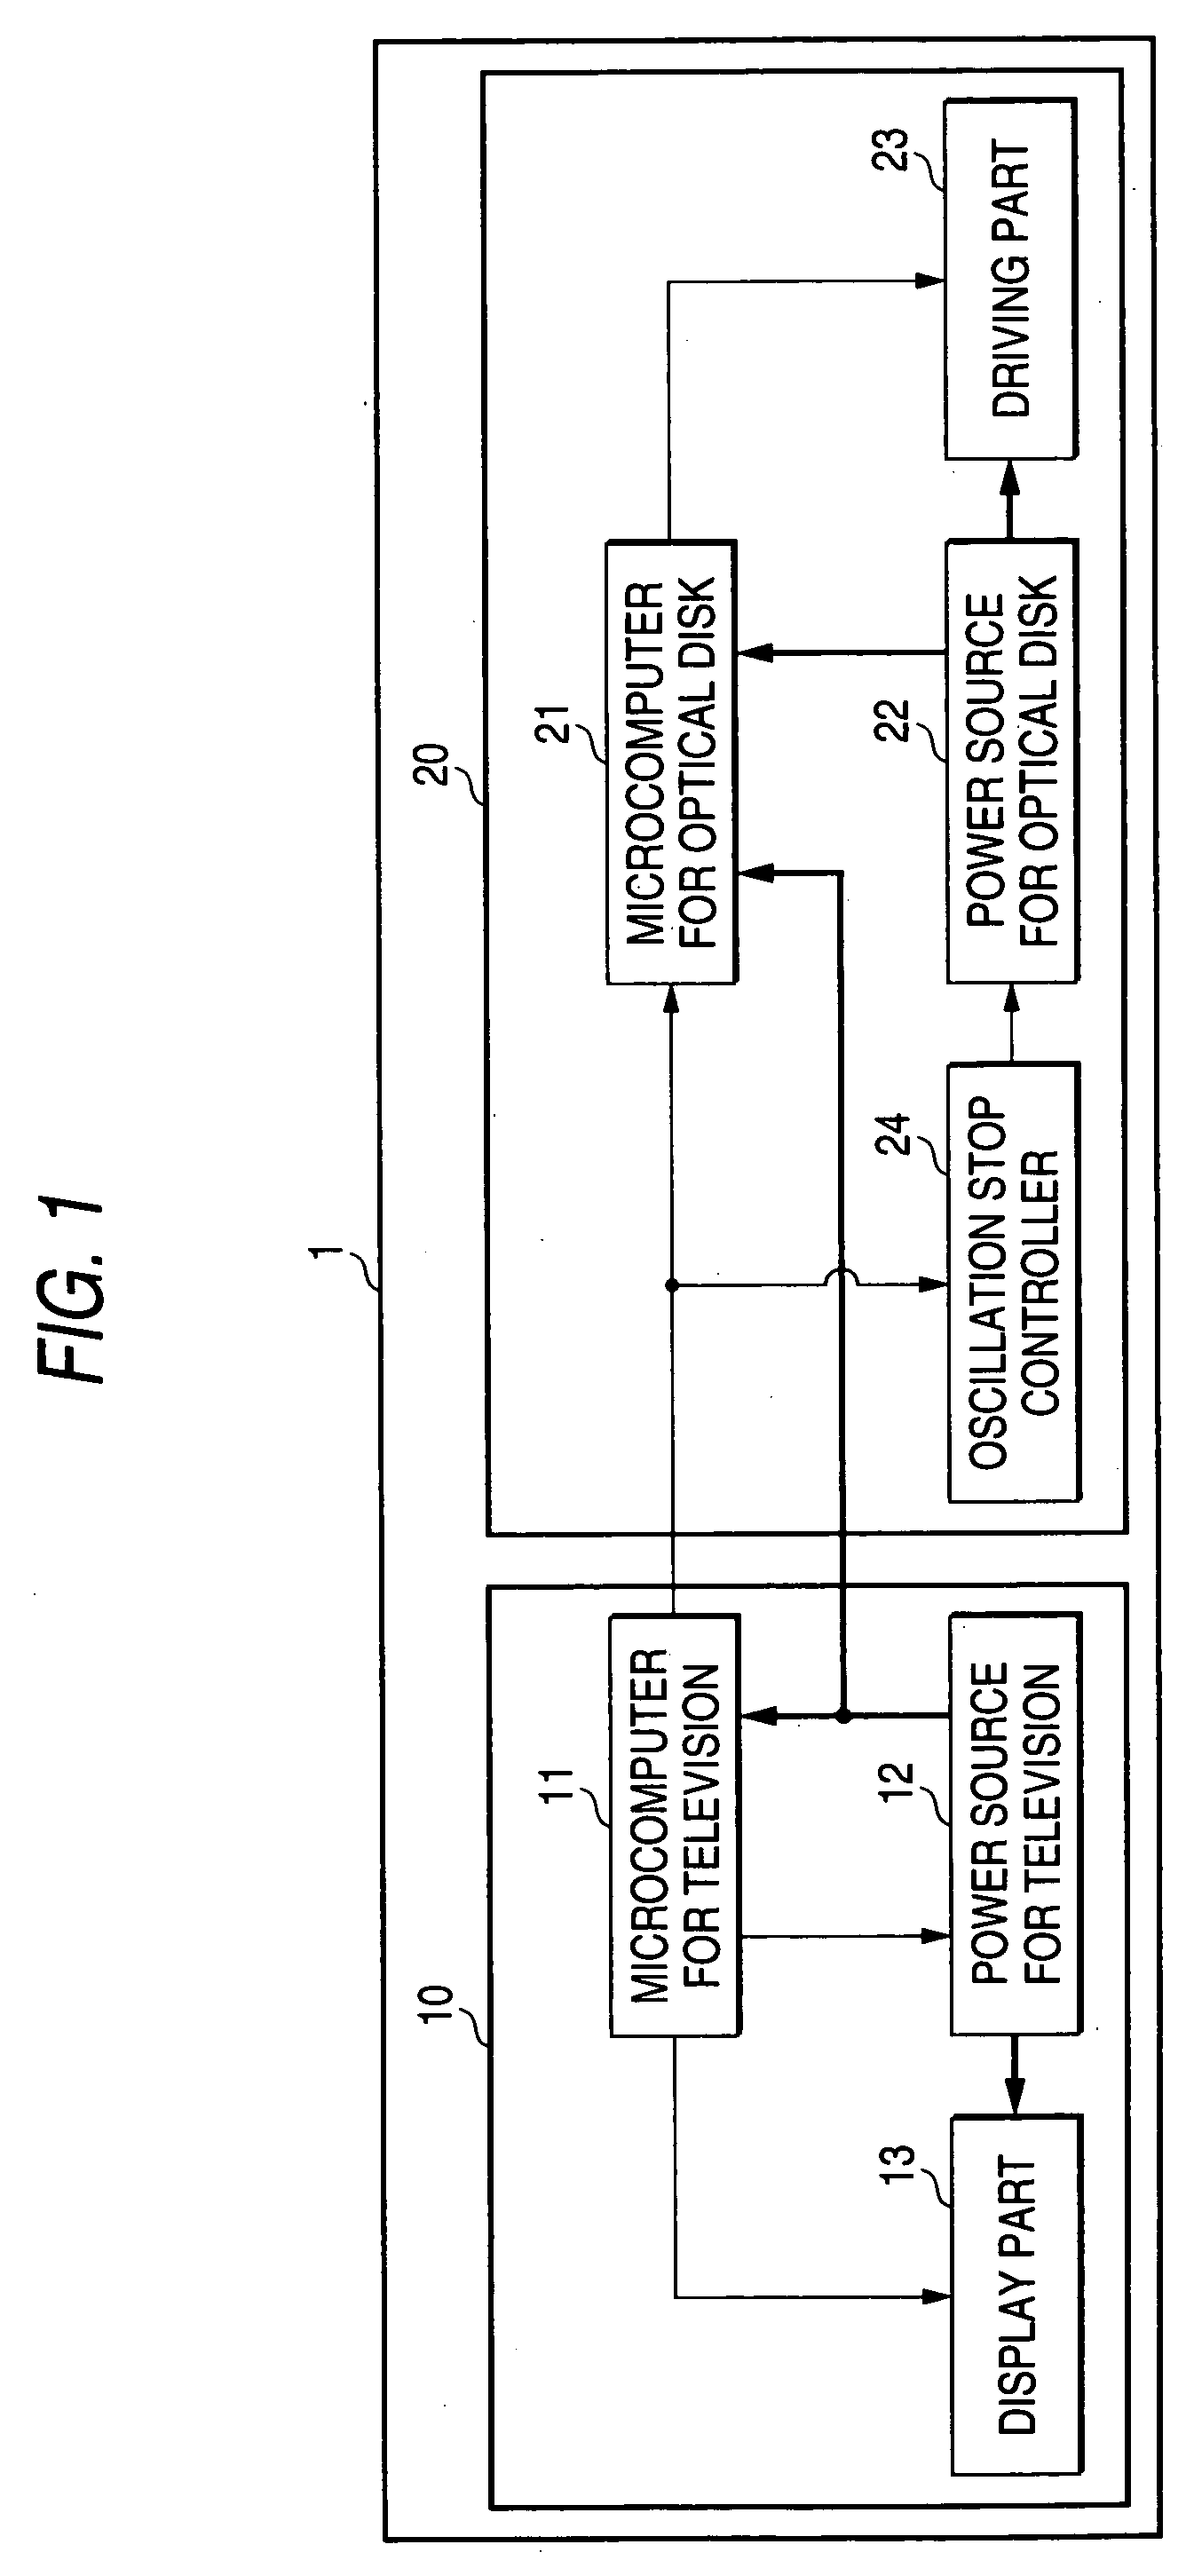 Television apparatus embedded with optical disk device